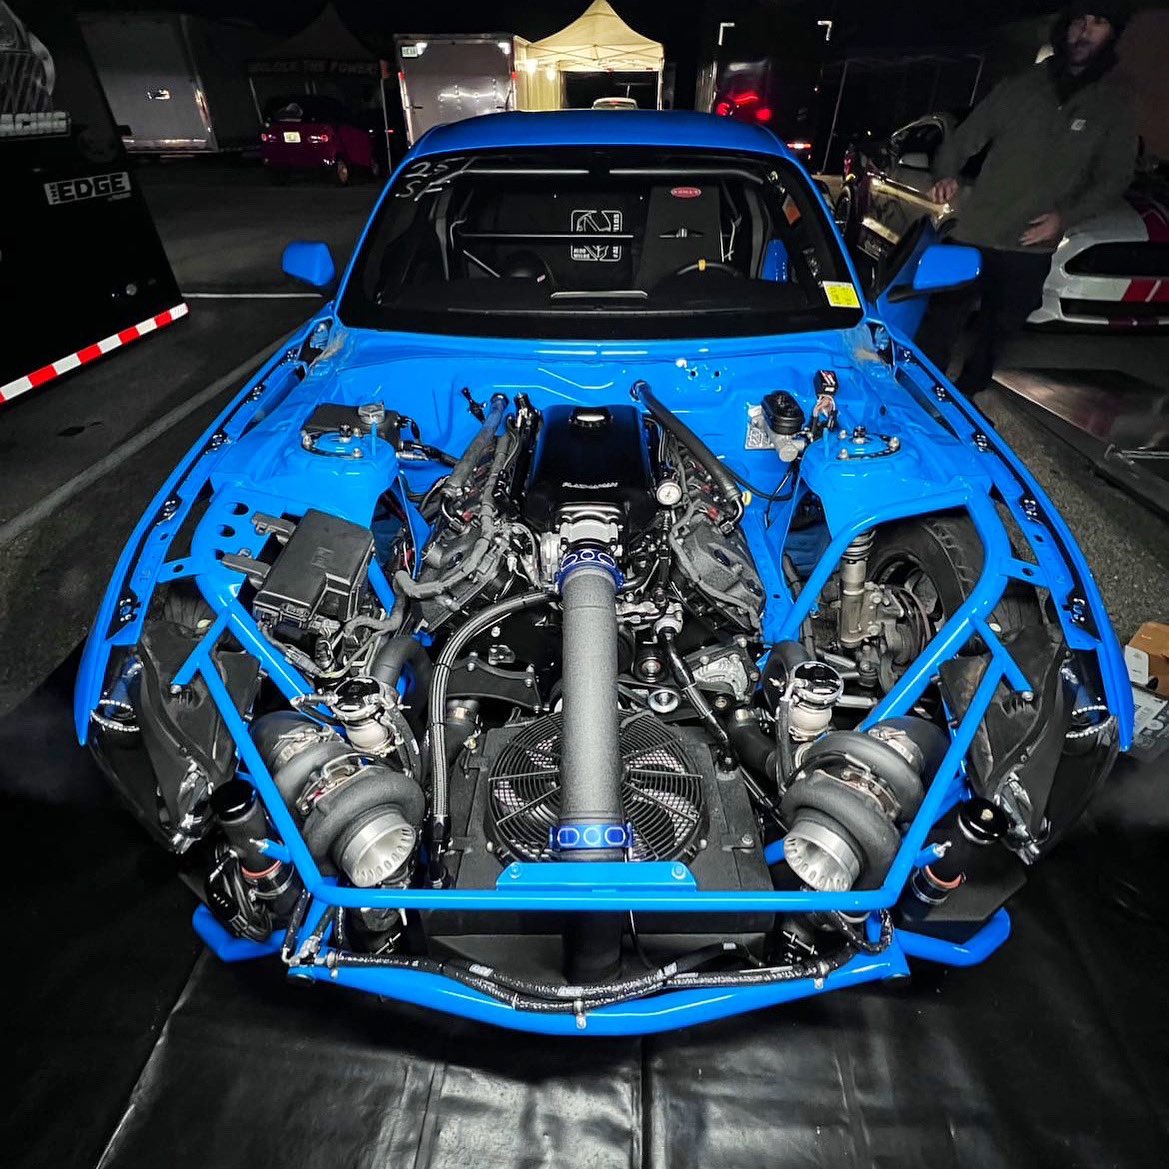 The Blue Bean is ready to party 🕺🏽
#mrl #mexicoracingleague #youboyslikemexico #circledspecialties #uprproducts #precisionturbo #lundracing